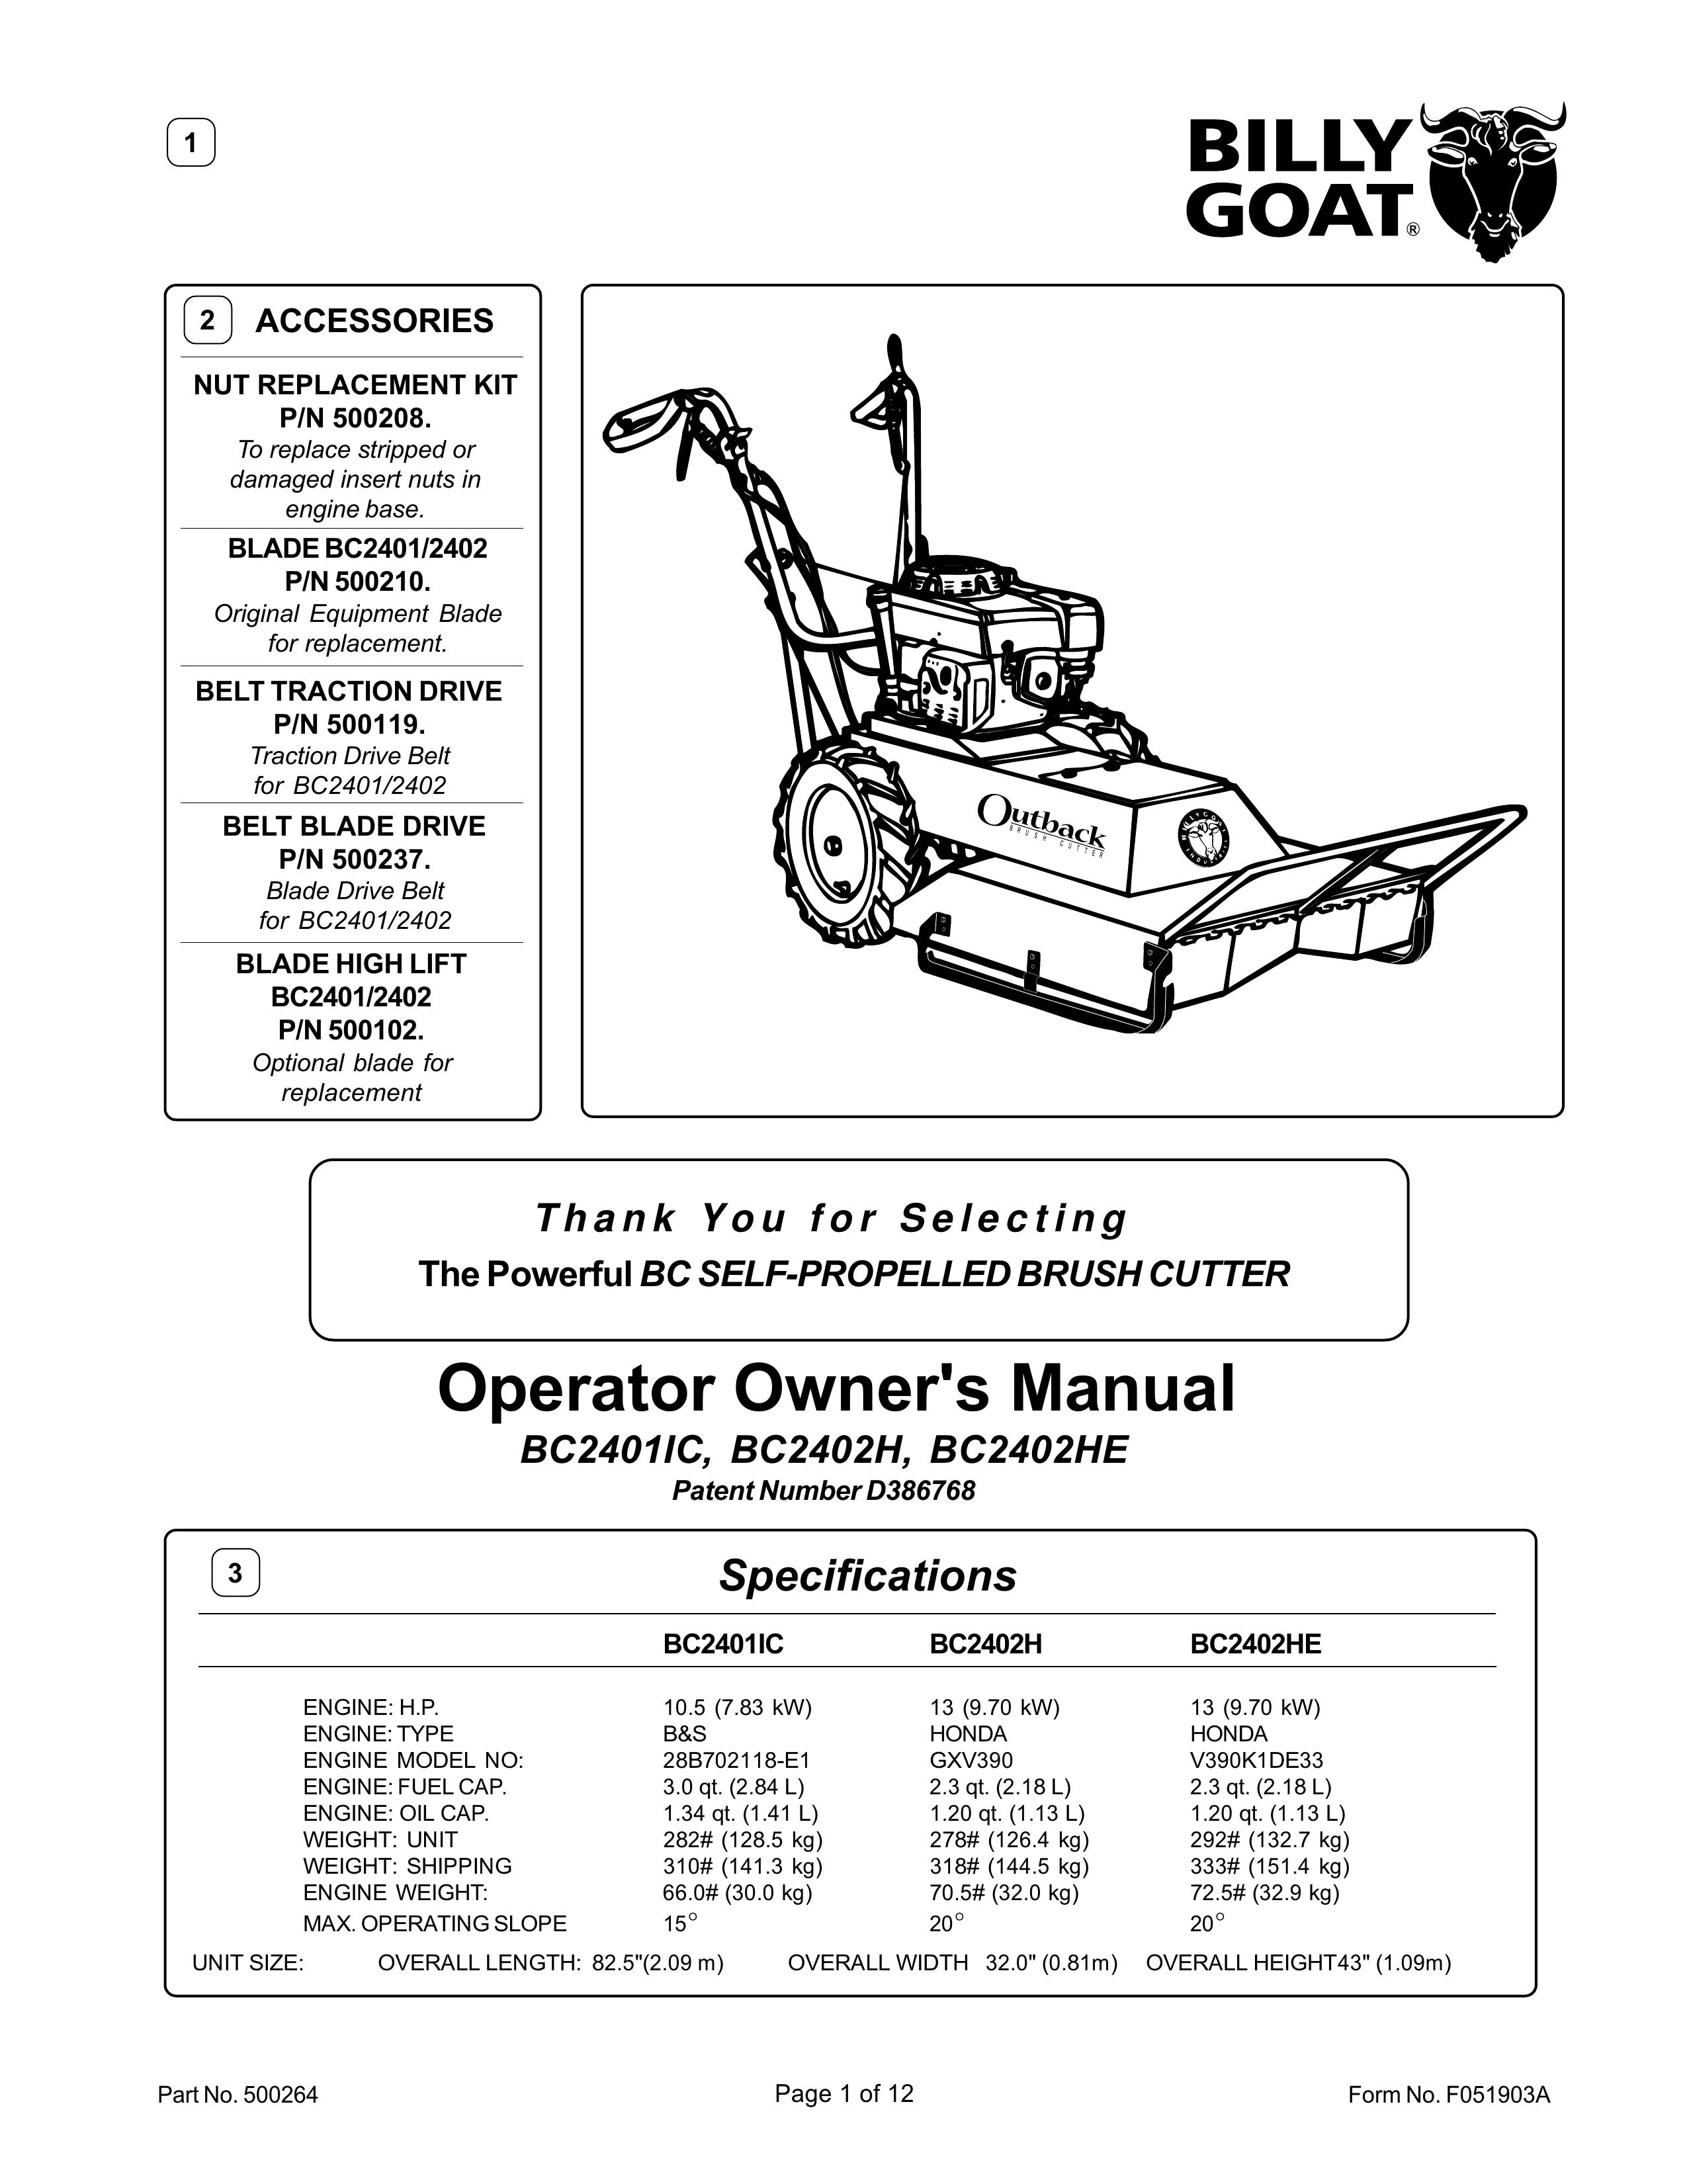 Billy Goat BC2401IC Brush Cutter User Manual